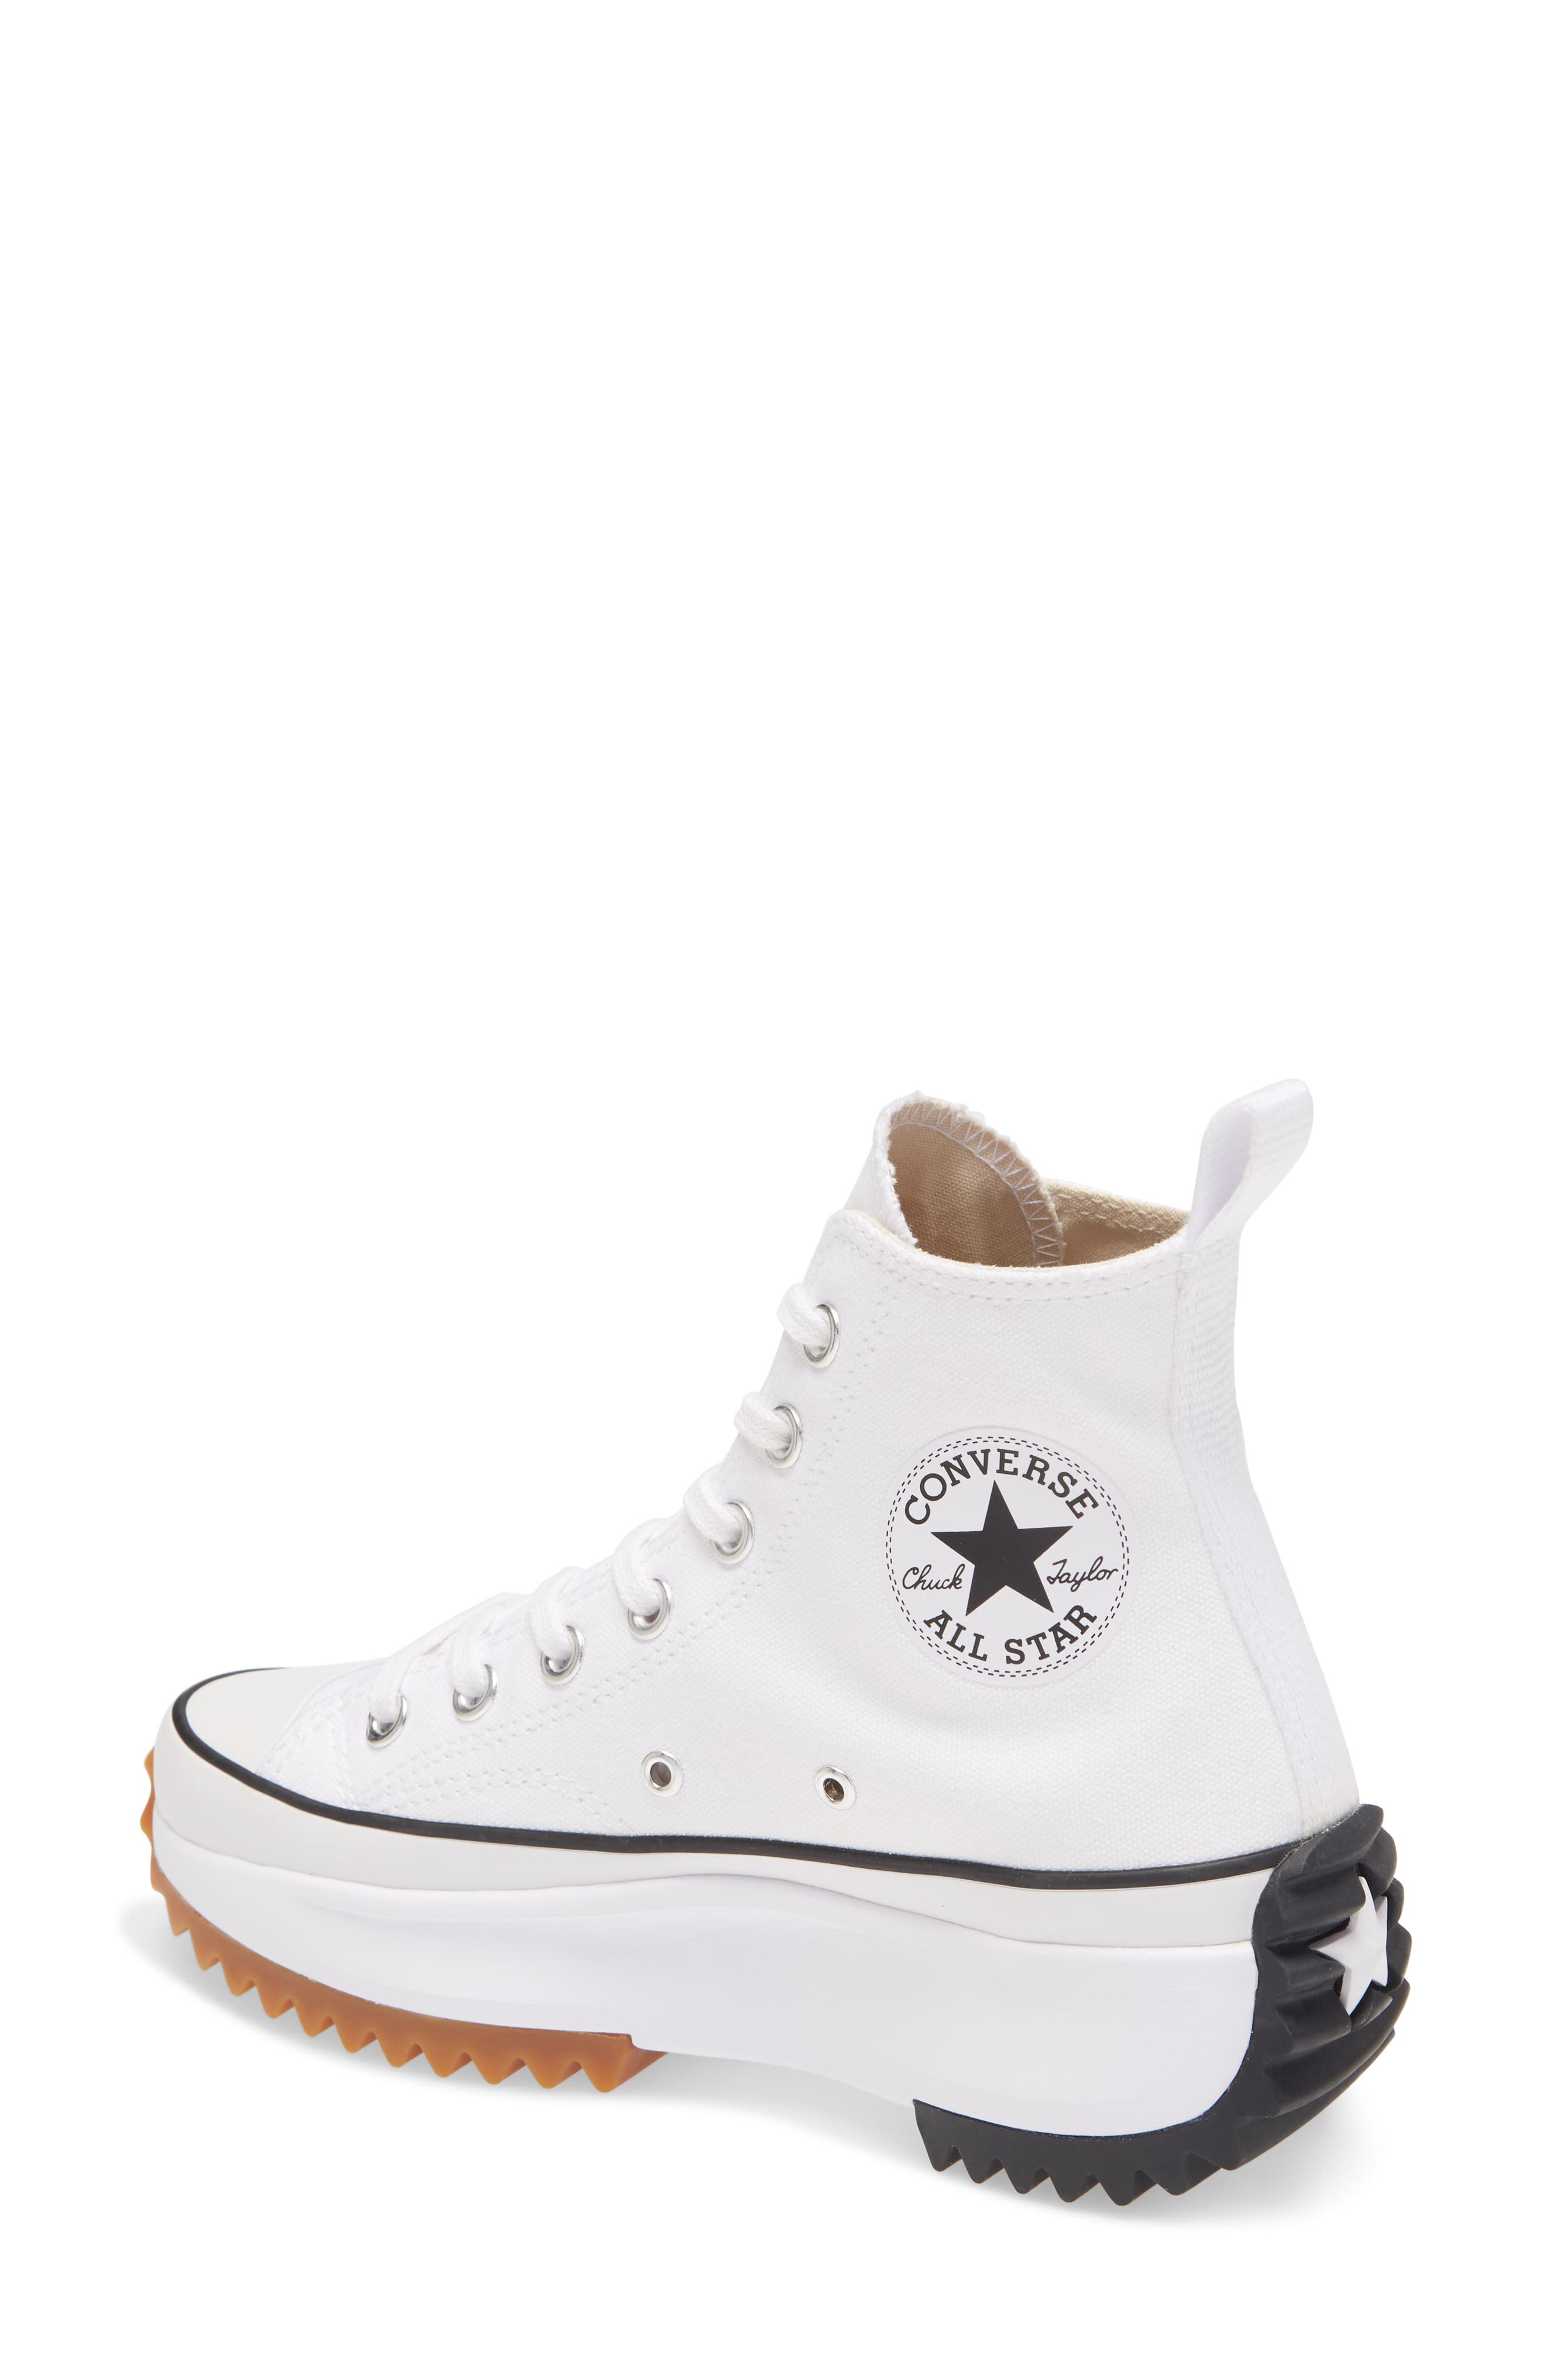 all star converse with heels